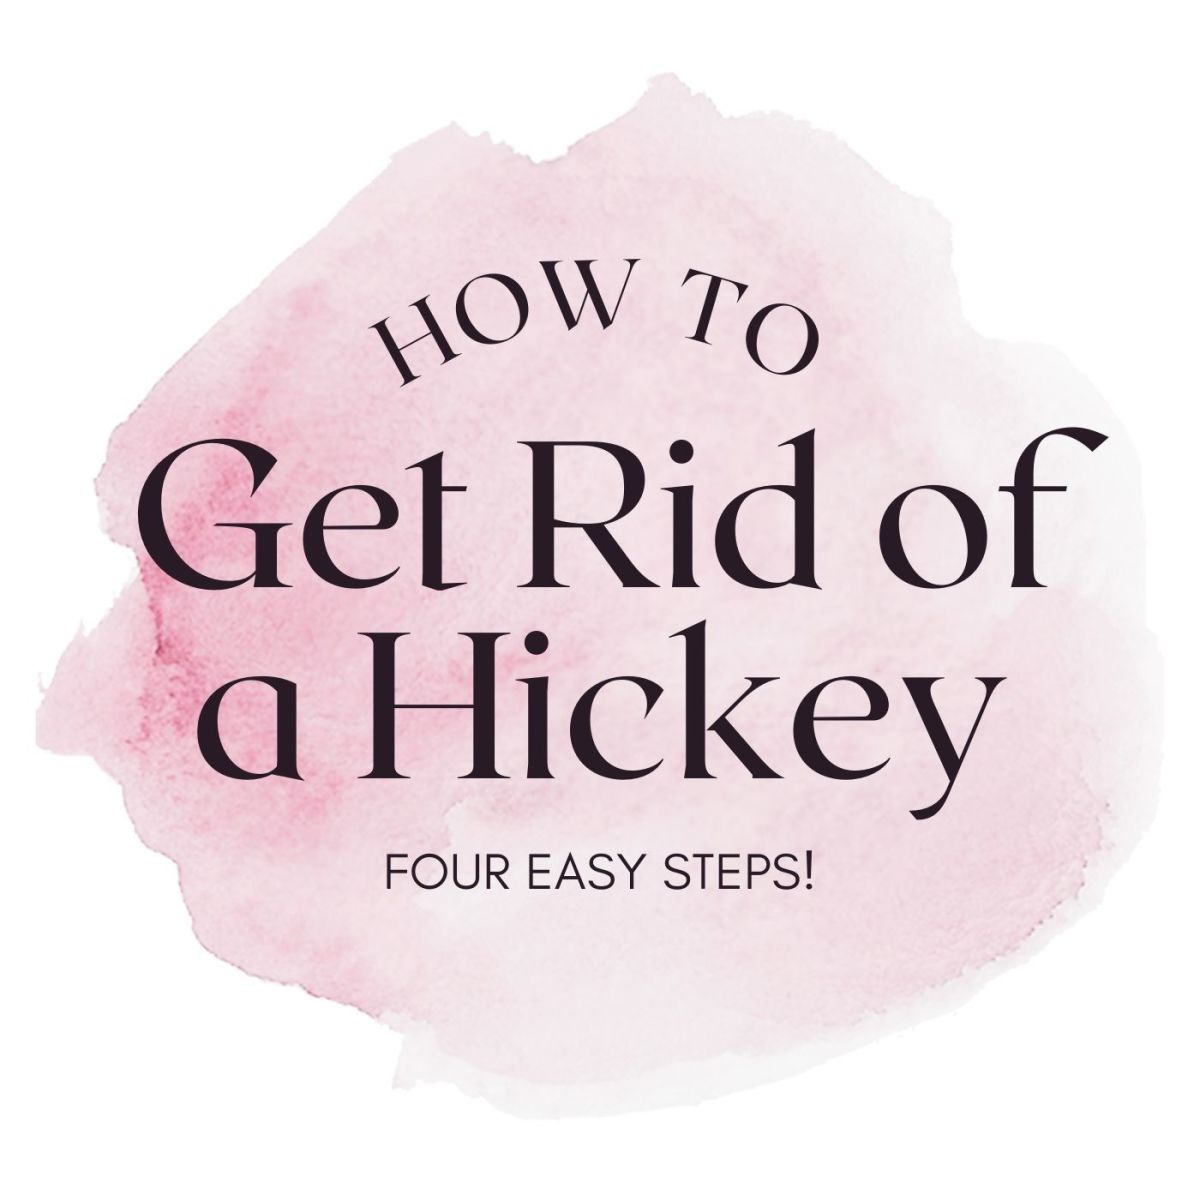 Are you in need of a quick fix for your hickey?